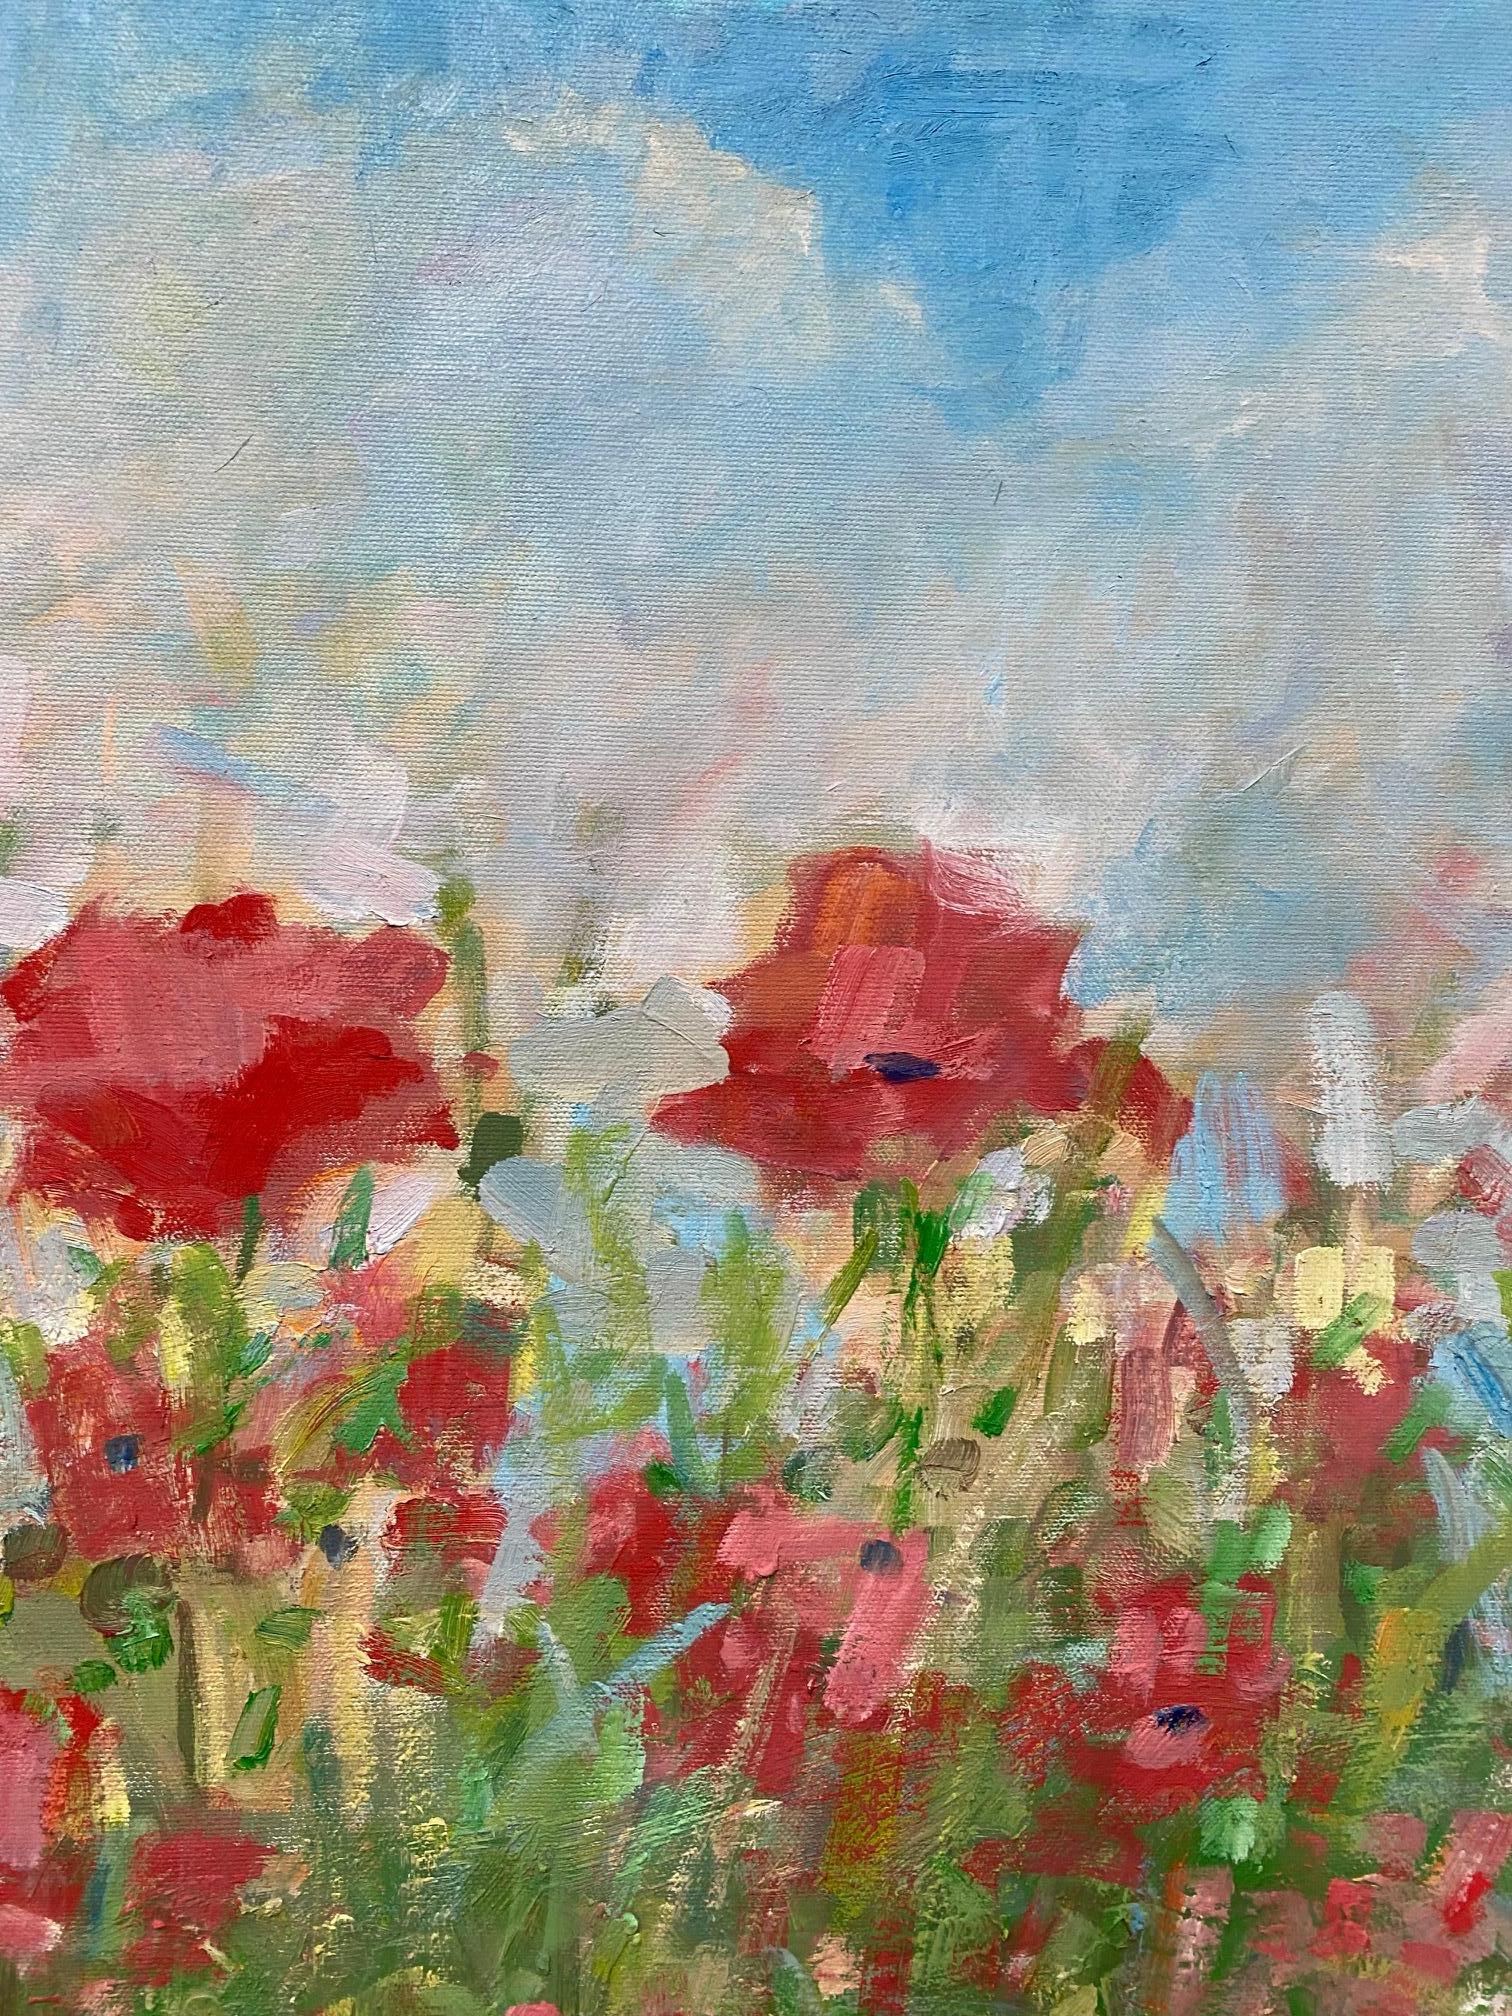 It's late April and the field of poppies is sumptuous and abundant!  These red wild flowers compete for the sunlight for their nutriment, fresh air and attention!  The vibrant greenery showcases the natural beauty in the contemporary floral